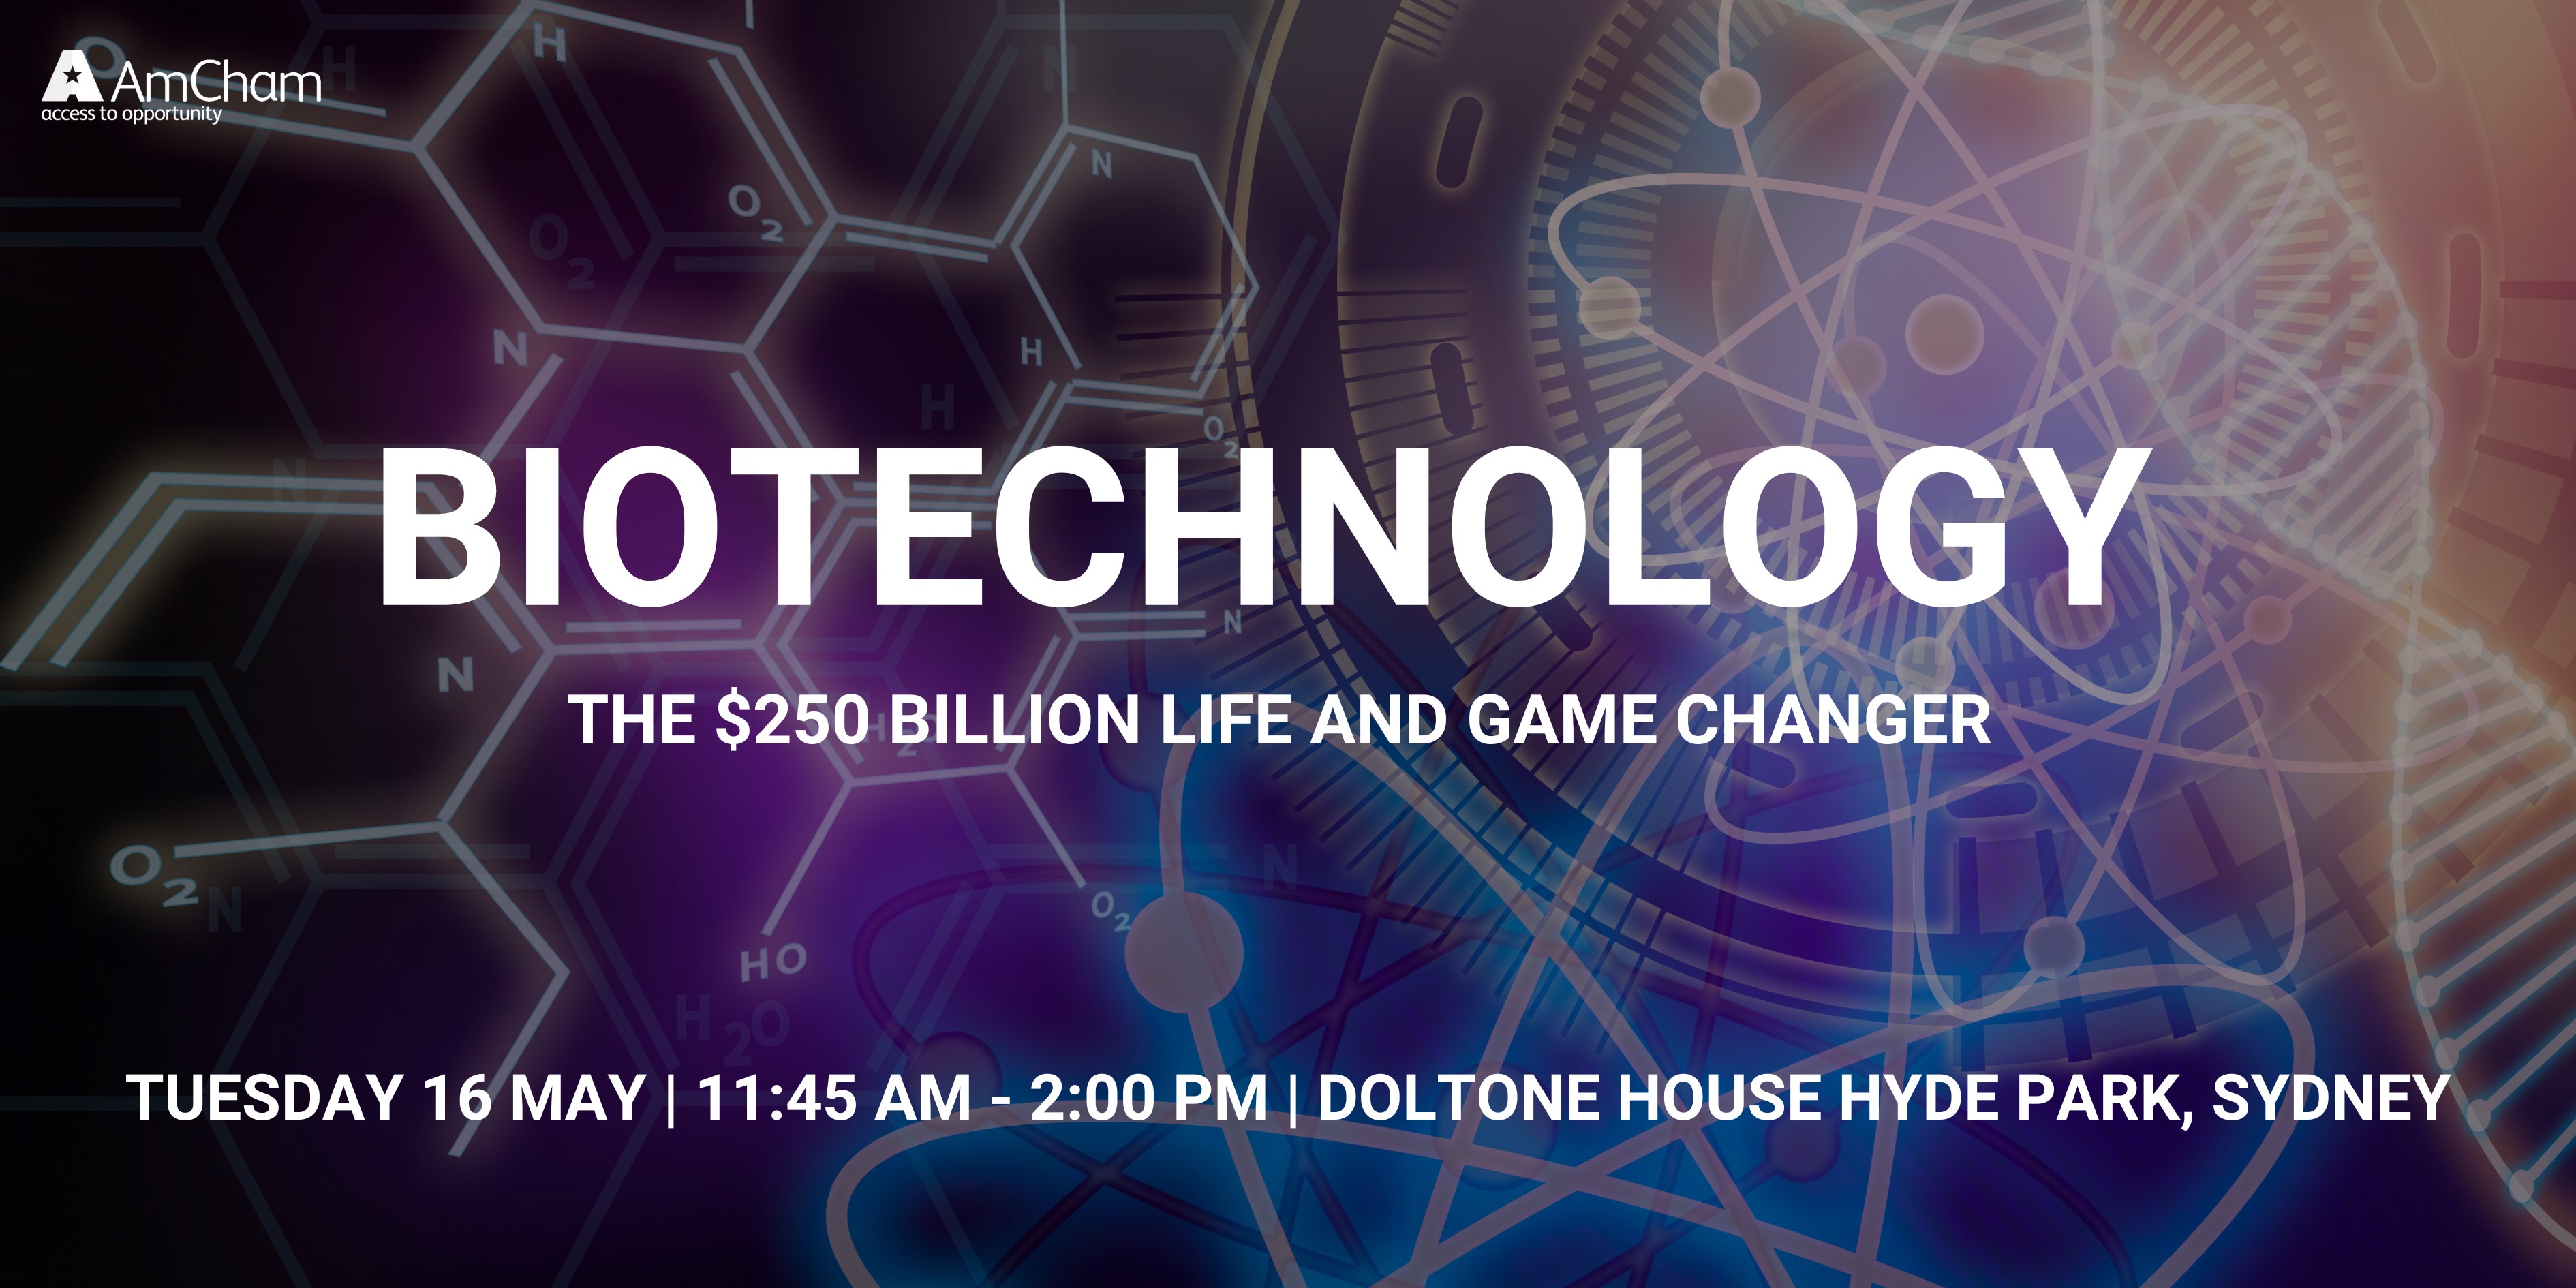 Biotechnology - the $250 Billion Life and Game Changer